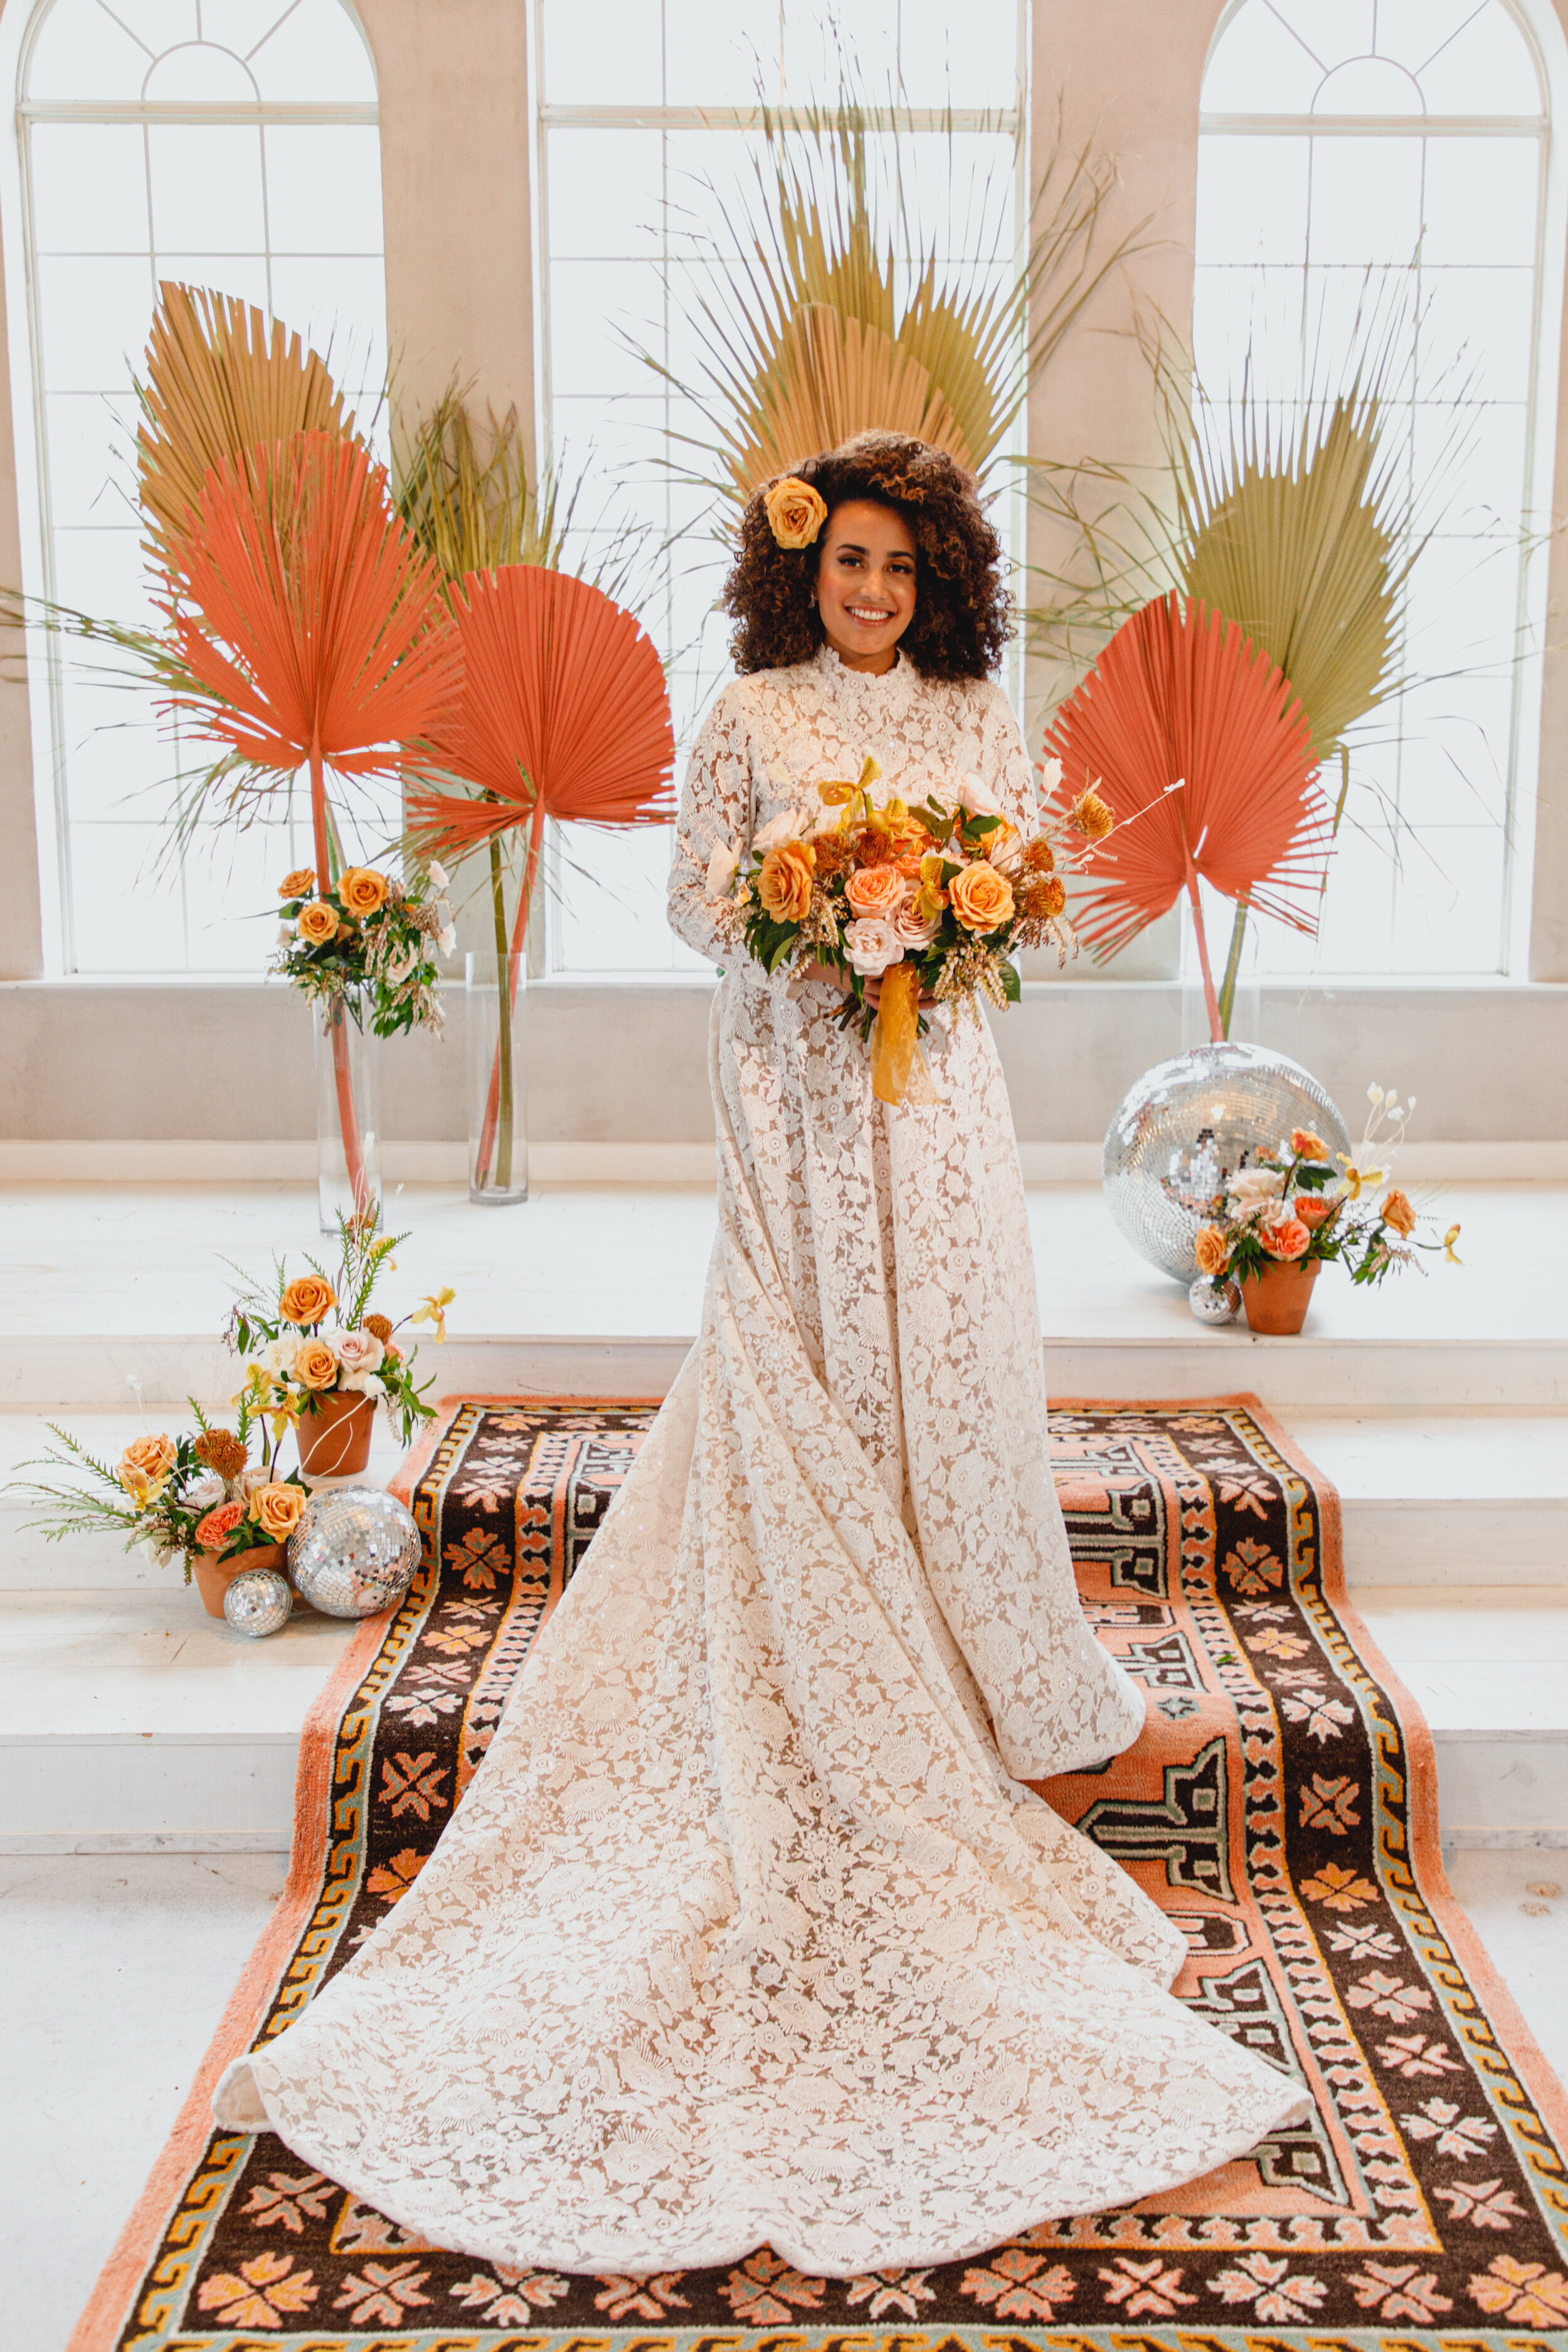  Dany Tabet Esha bridal gown at The Emerson wedding venue in DWF photographed by Cortnie Dee Photography 